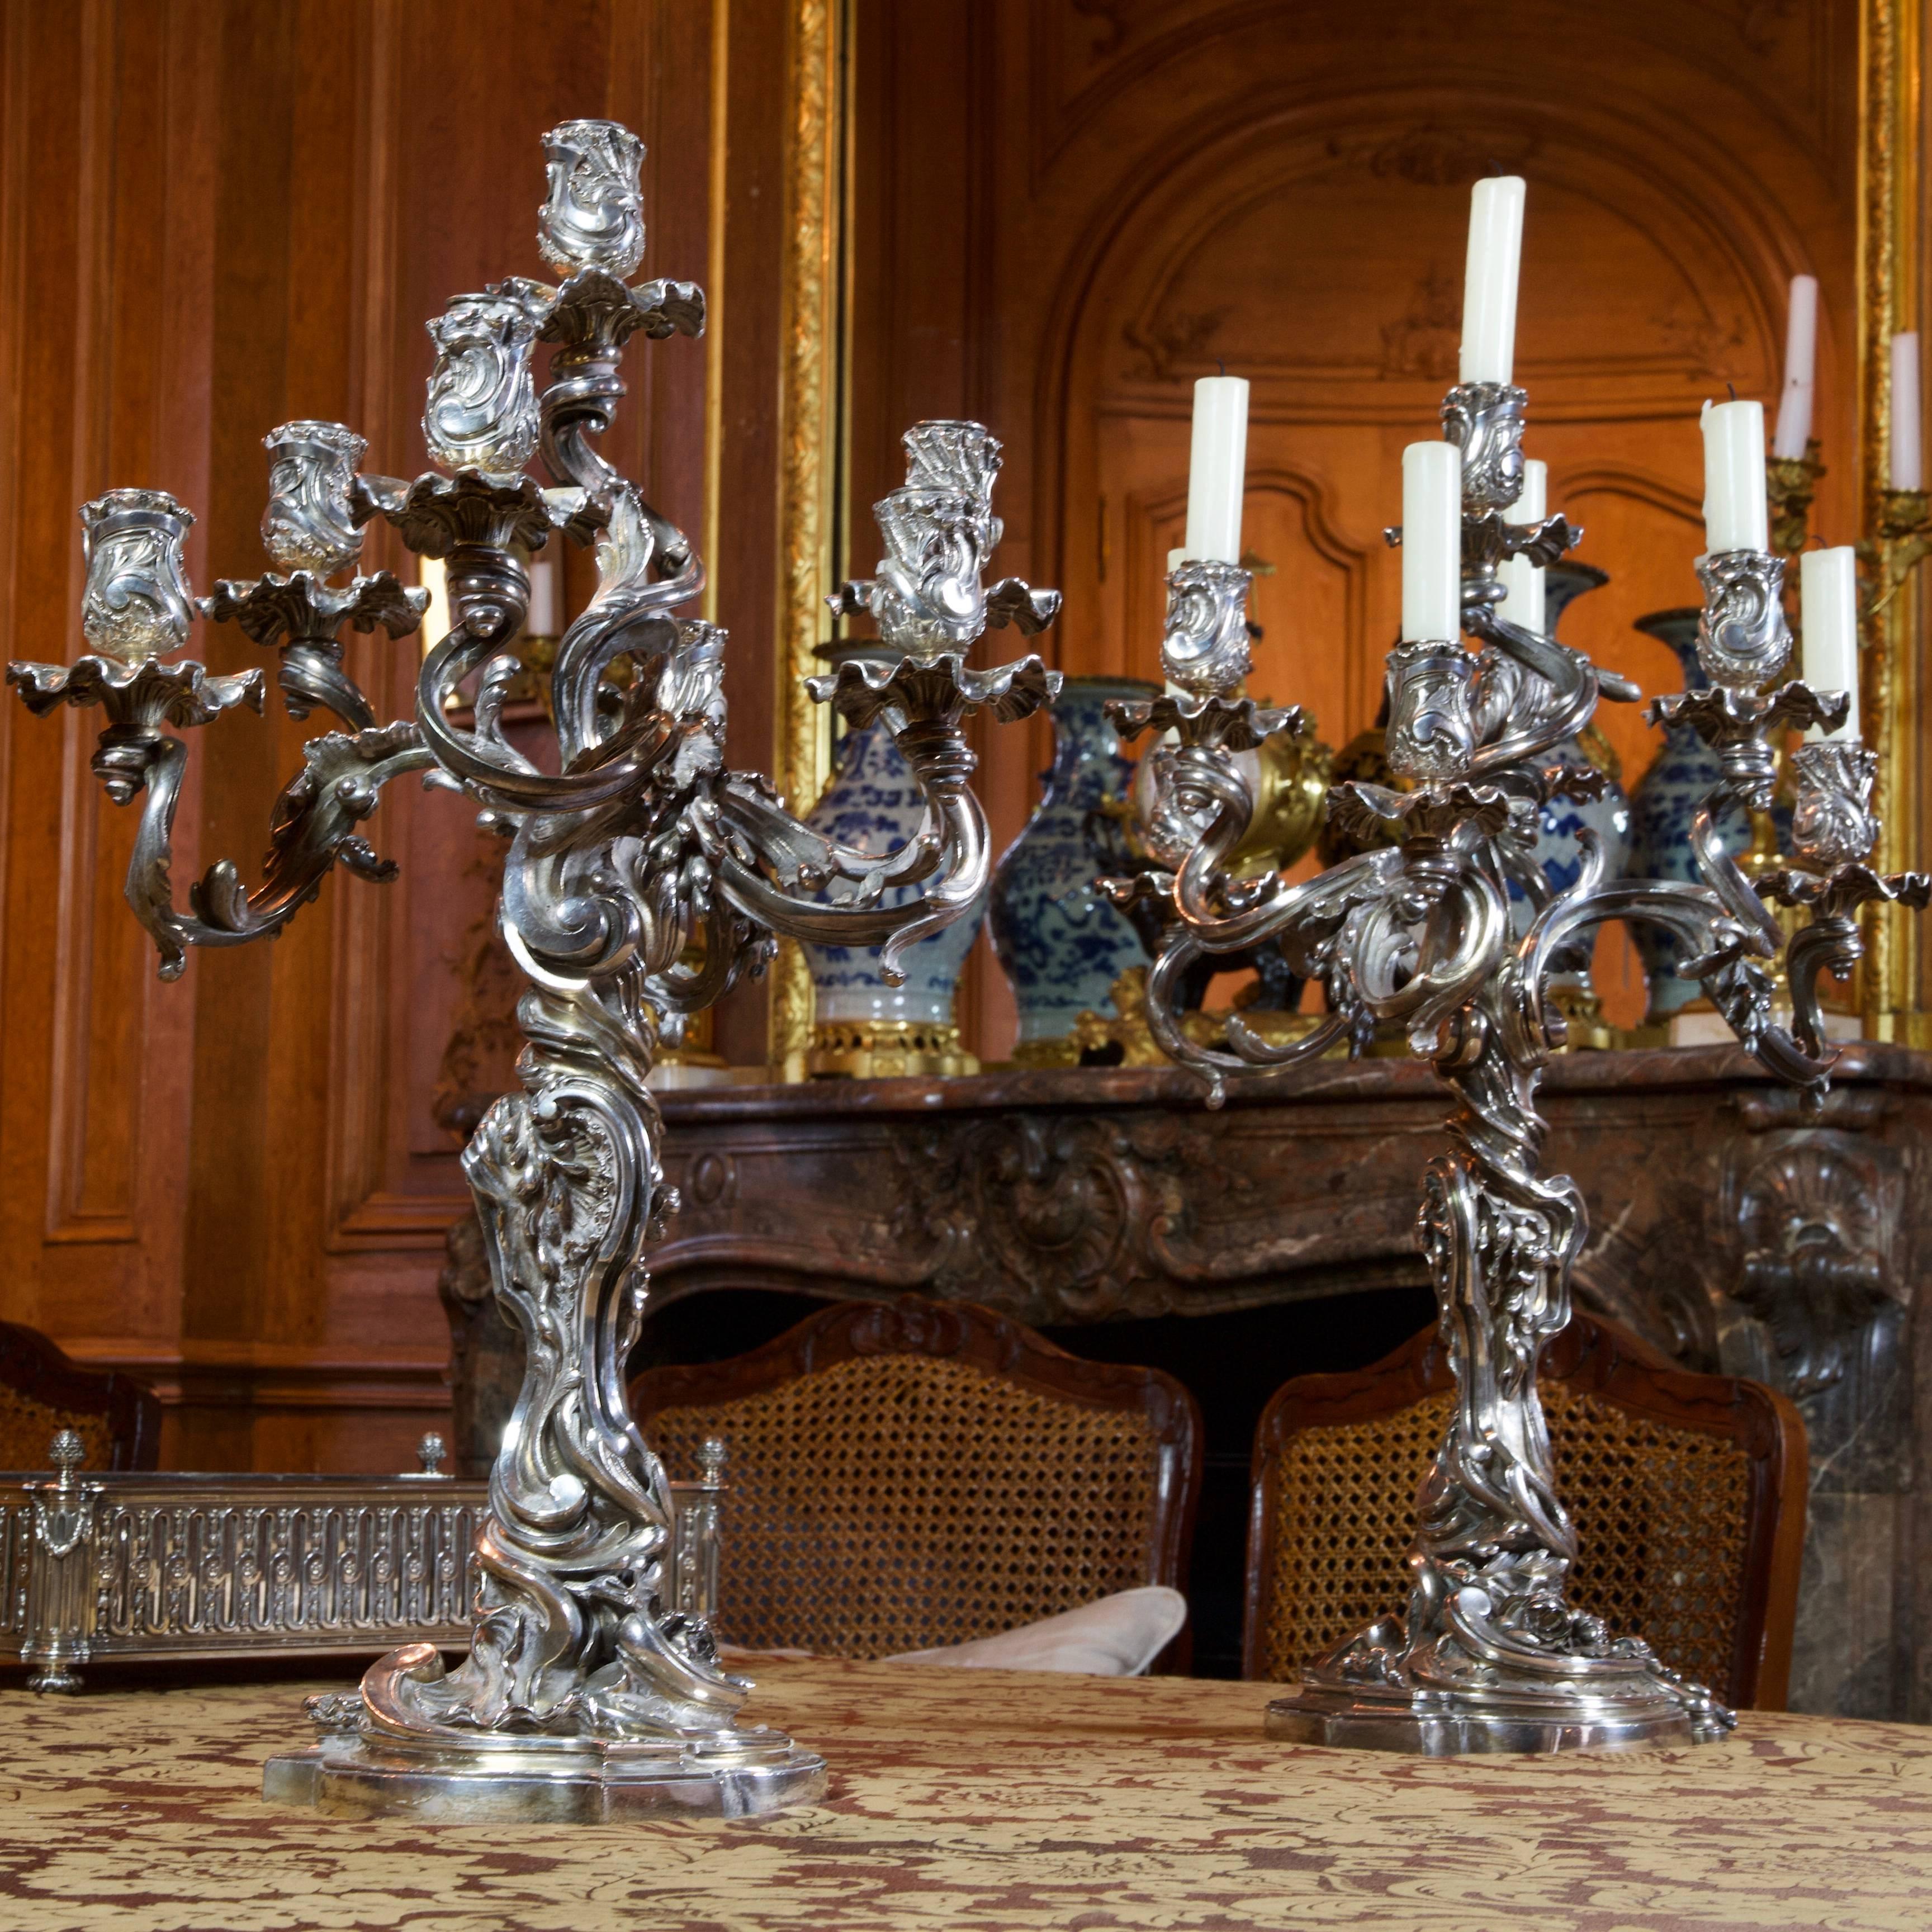 Large pair of candelabra with seven lights. Bronze silvered. Totally decorated with scrolls, flowers, guirlands, enroulements, in pure style of Rococo.
Signed Froment-Meurice on the base. Froment-Meurice was a great silversmith in Paris in 19th